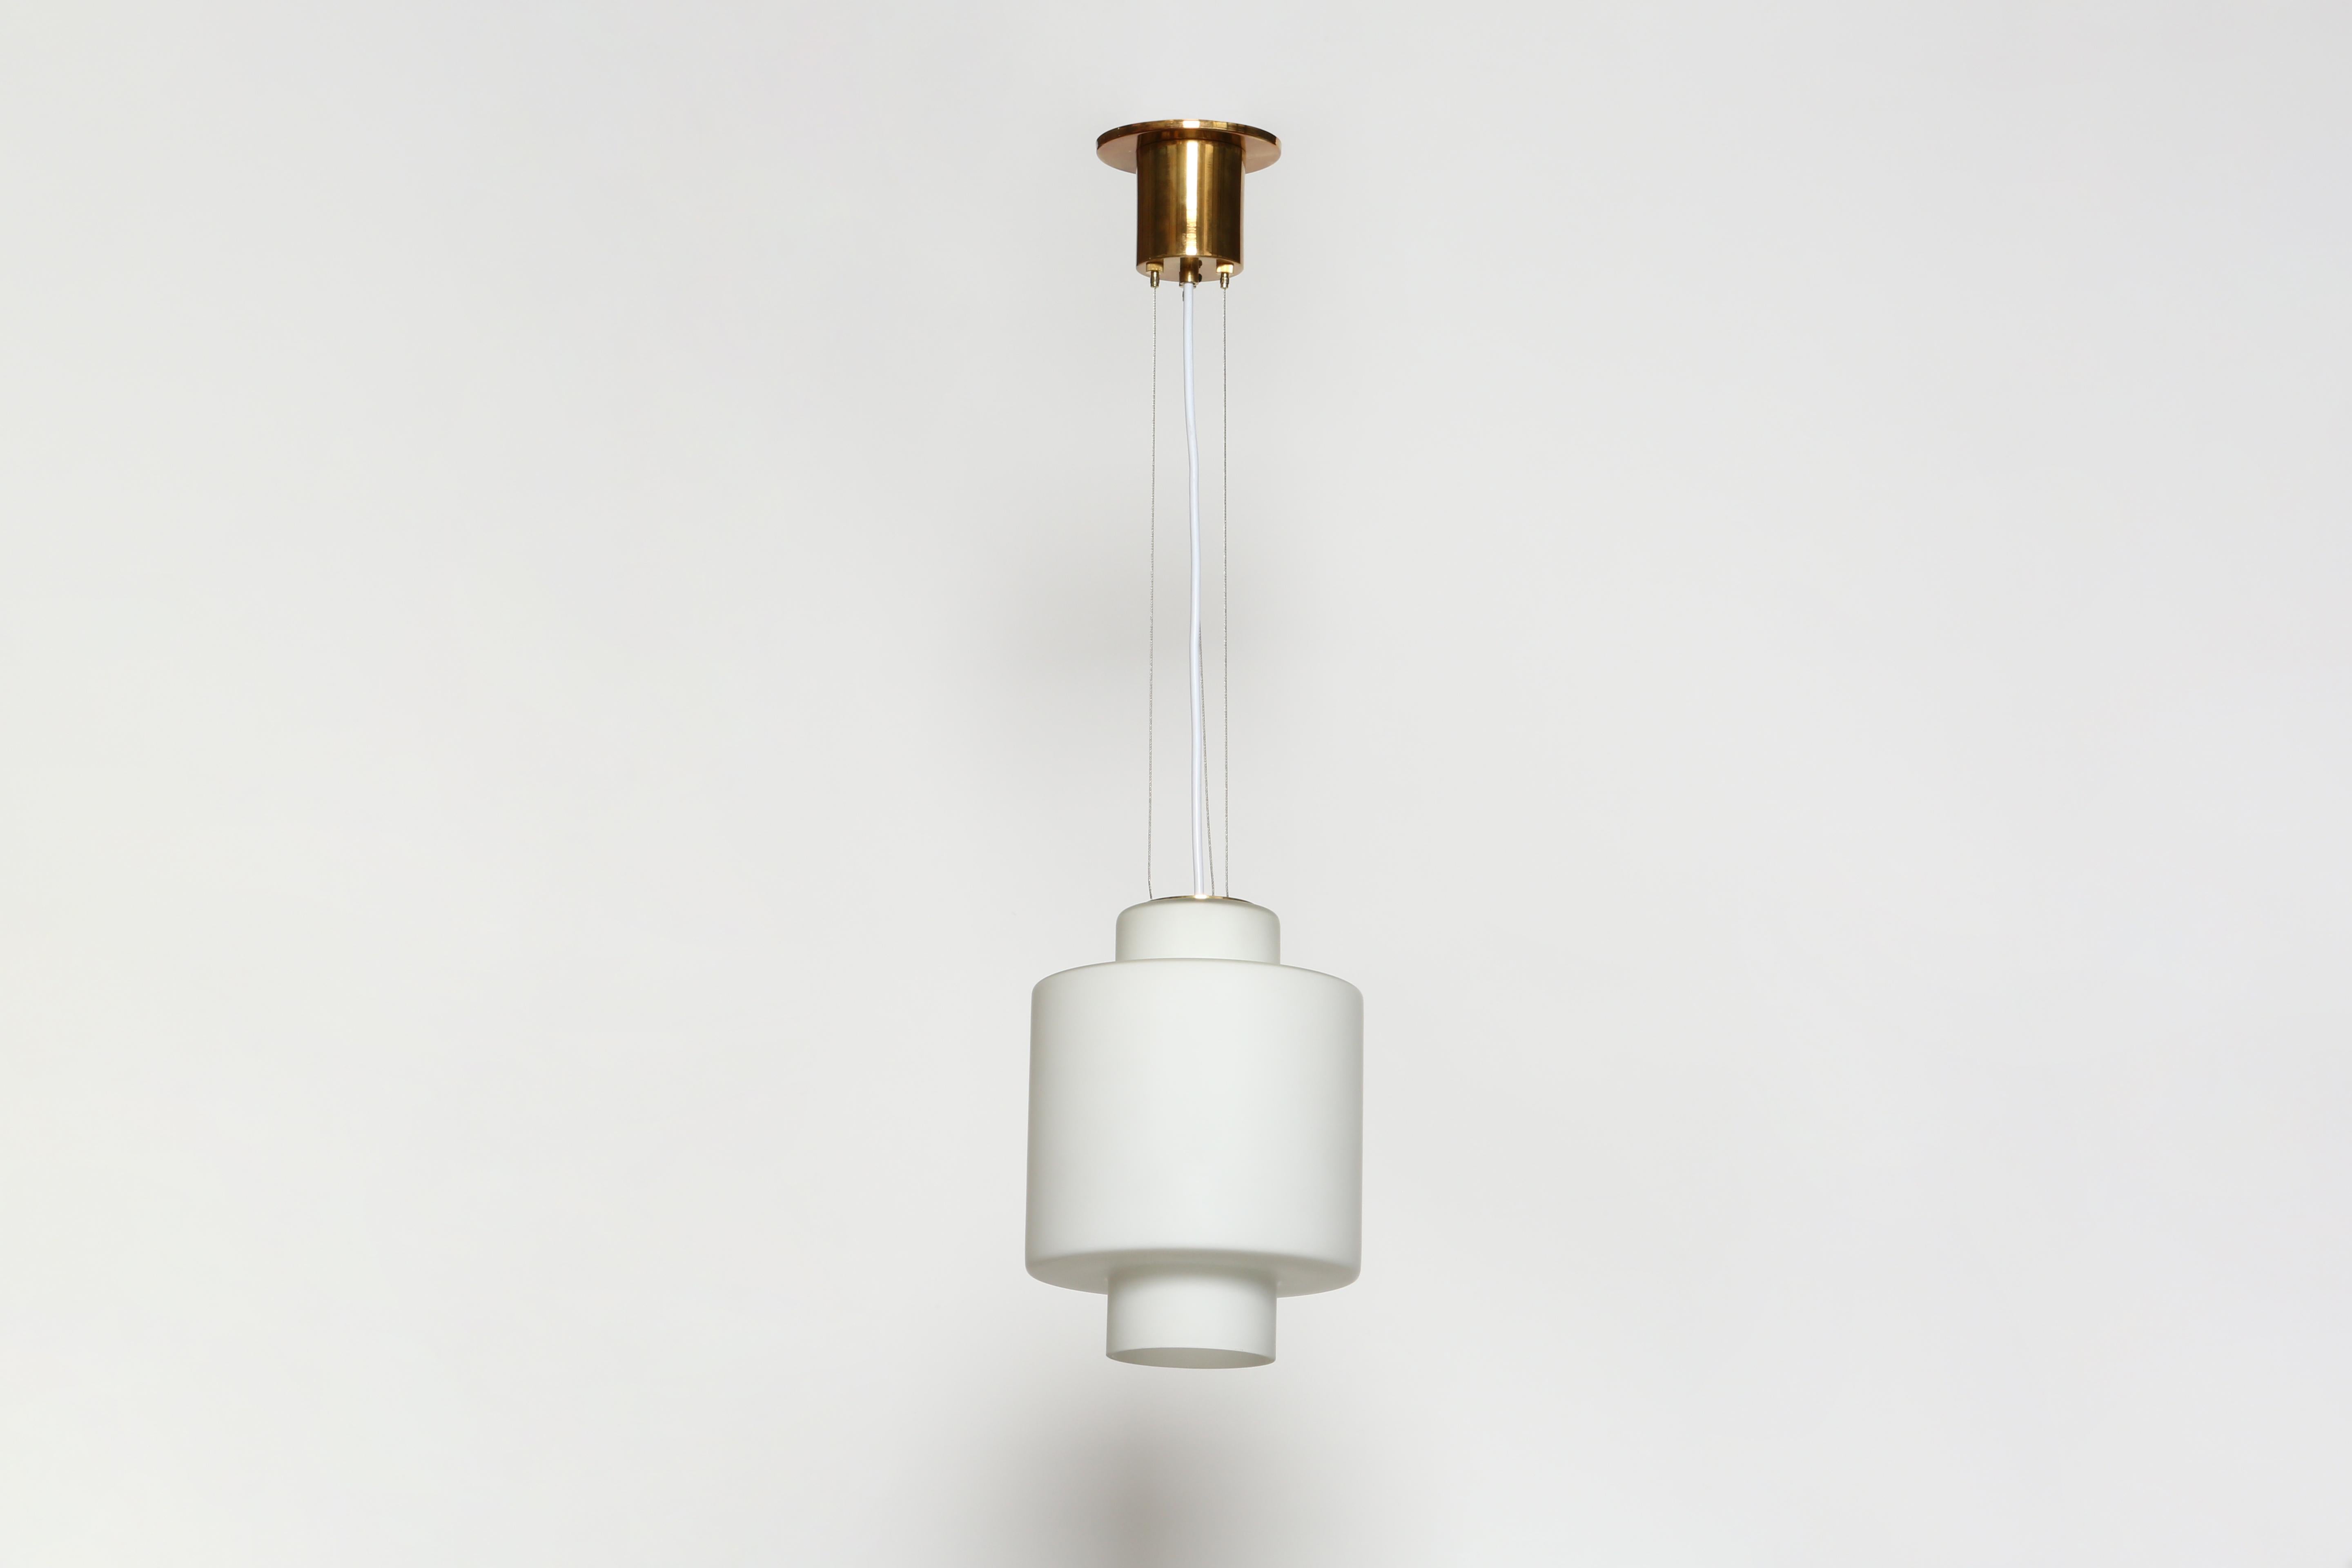 Stilnovo ceiling pendant
Designed and made in Italy, 1960s
Opaline glass, brass
Rewired for US
Takes one medium base bulb 
Overall drop is adjustable.
Height of the glass is 12 inches.

We take pride in bringing vintage fixtures to their full glory